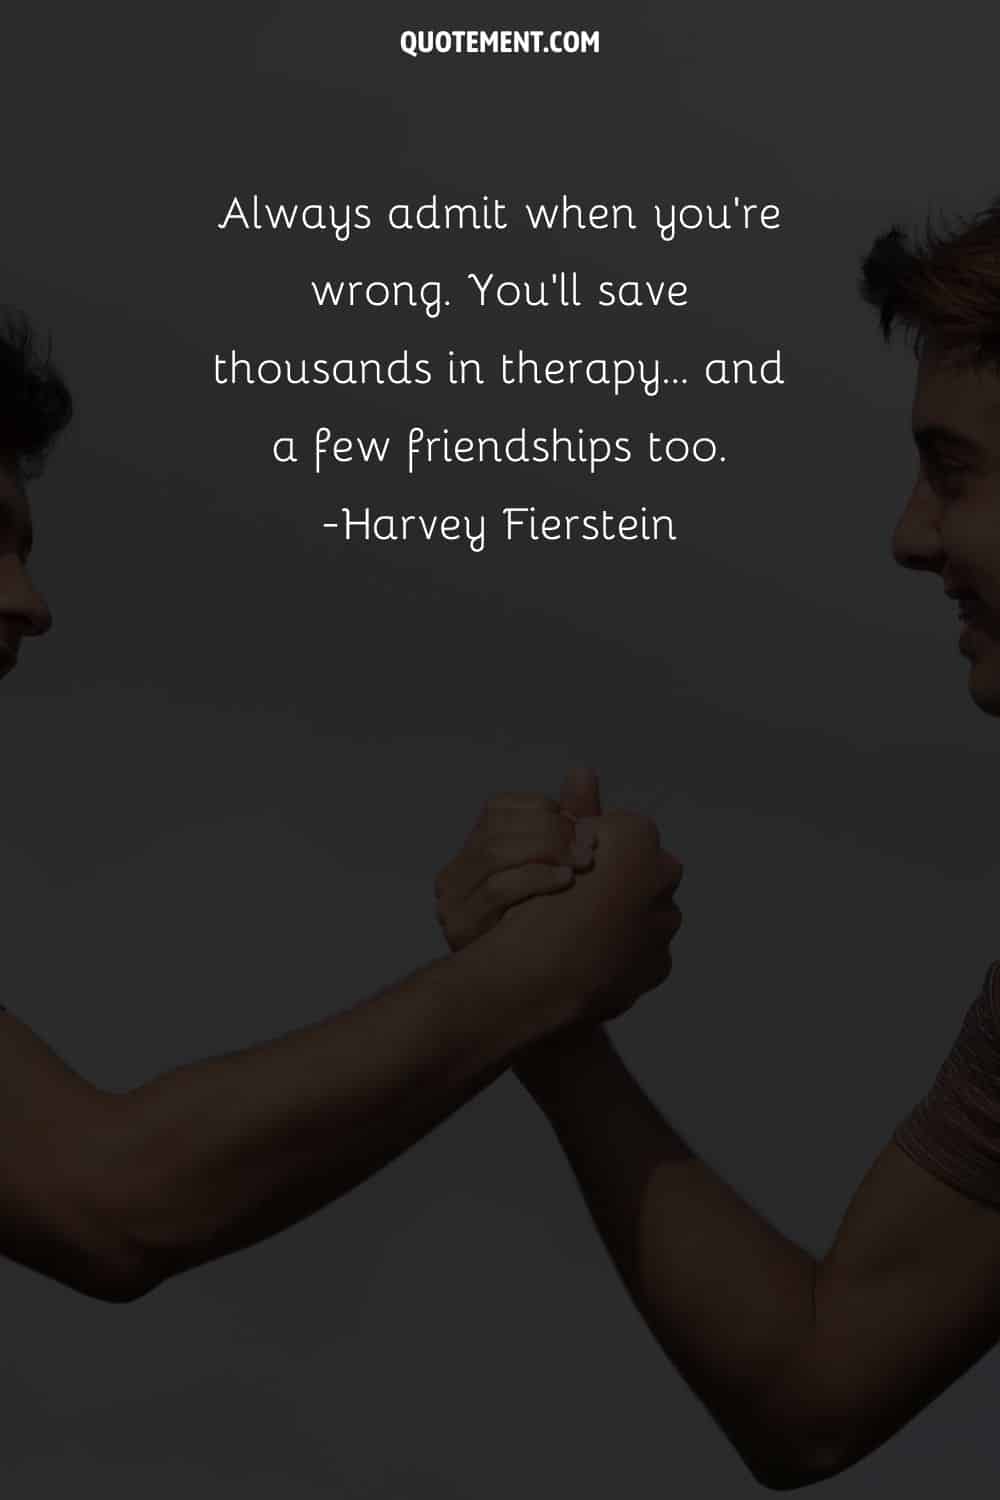 teen boys' handshake image representing teenage quote about friendship